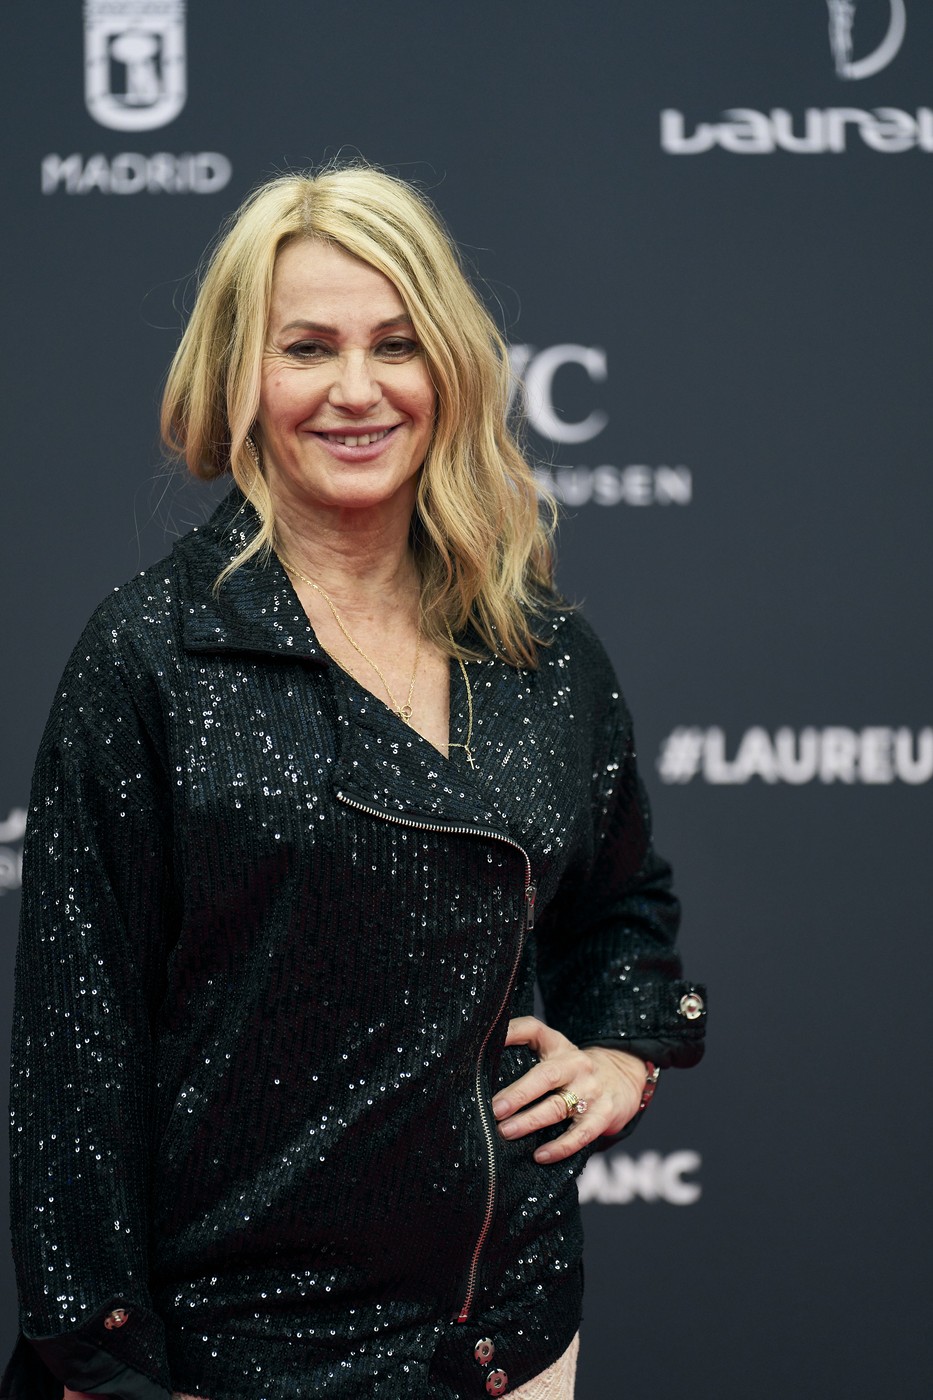 April 22, 2024, Madrid, Madrid, Spain: Nadia Comaneci attends Laureus World Sports Awards Madrid 2024 - Red Carpet at Palacio de Cibeles on April 22, 2024 in Madrid, Spain,Image: 867110695, License: Rights-managed, Restrictions: , Model Release: no